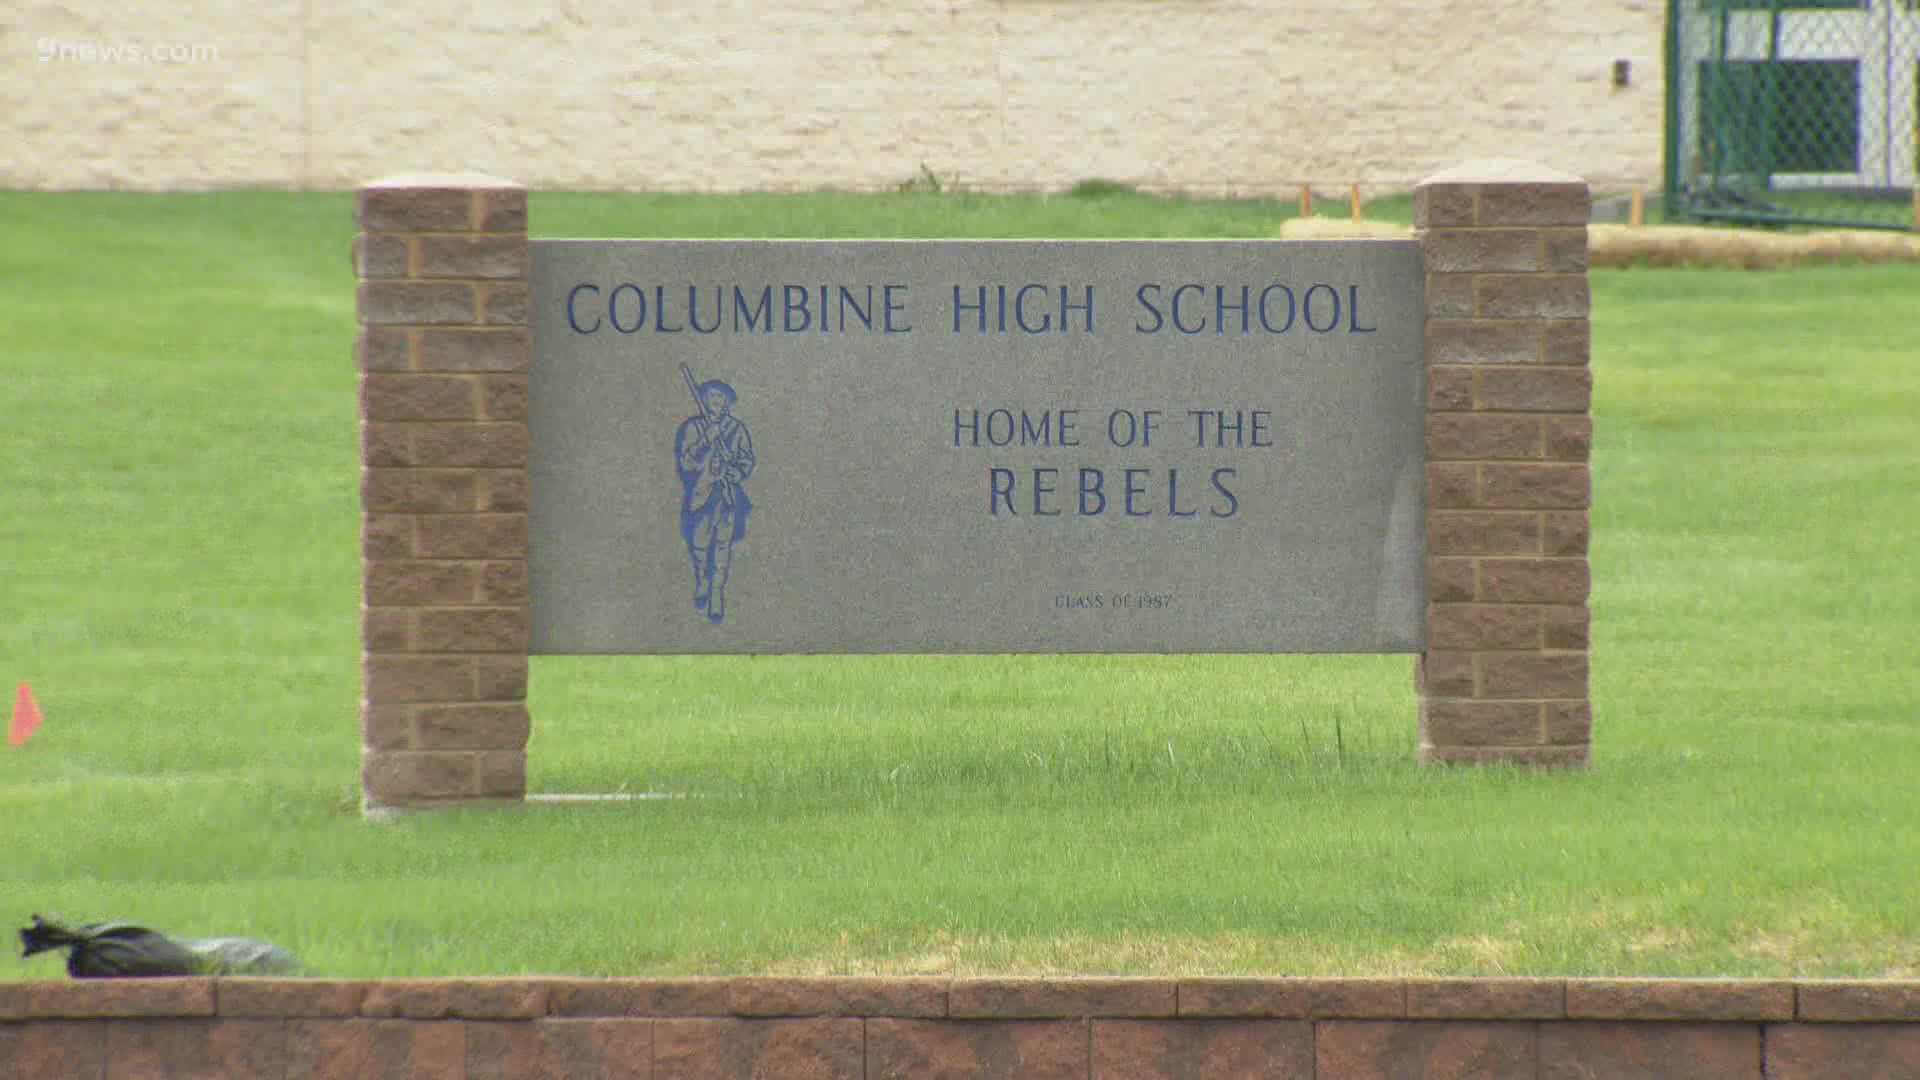 Teachers, and other staff members, scrambled to distribute more than a thousand at-home COVID testing kits to students at Columbine High School.